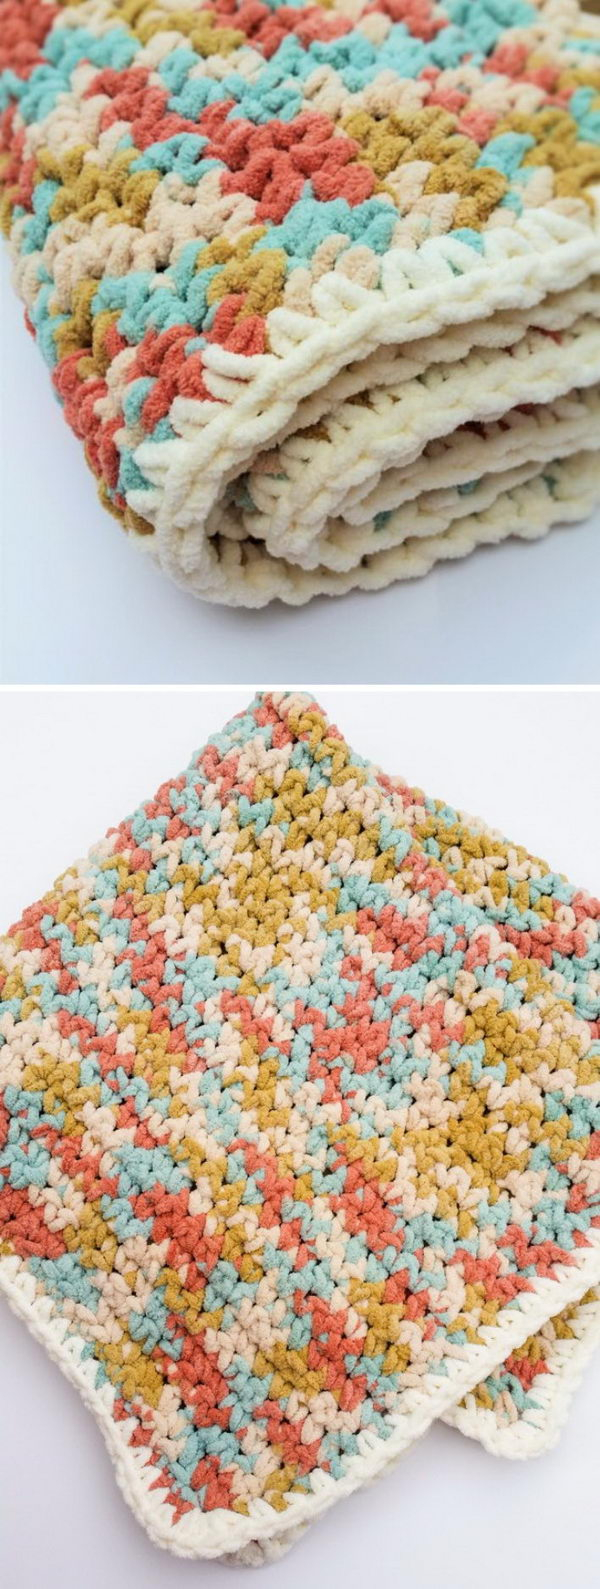 Crochet Baby Afghan Patterns 30 Free Crochet Patterns For Blankets Hative